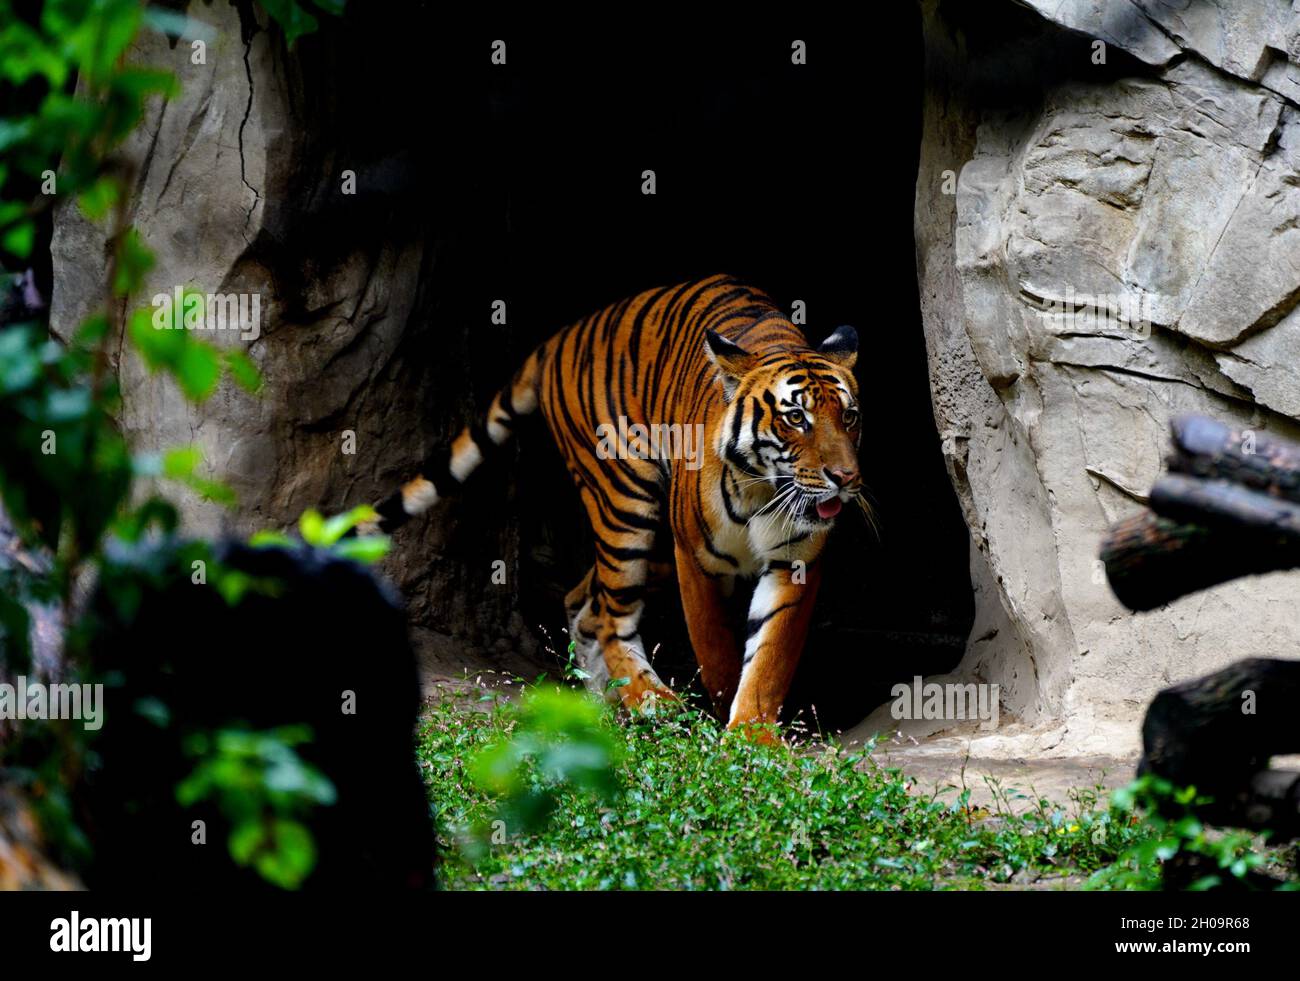 Shanghai. 11th Oct, 2021. Photo taken on Oct. 11, 2021 shows a South China tiger at the Shanghai Zoo in east China's Shanghai. The South China tiger is a rare kind endemic to China and is on the national first-class protection list. Currently, a total of 28 South China tigers are living in the Shanghai Zoo. The zoo has recorded each tiger's information and established a gene bank for research, and tigers are treated and bred in a scientific way. Credit: Zhang Jiansong/Xinhua/Alamy Live News Stock Photo